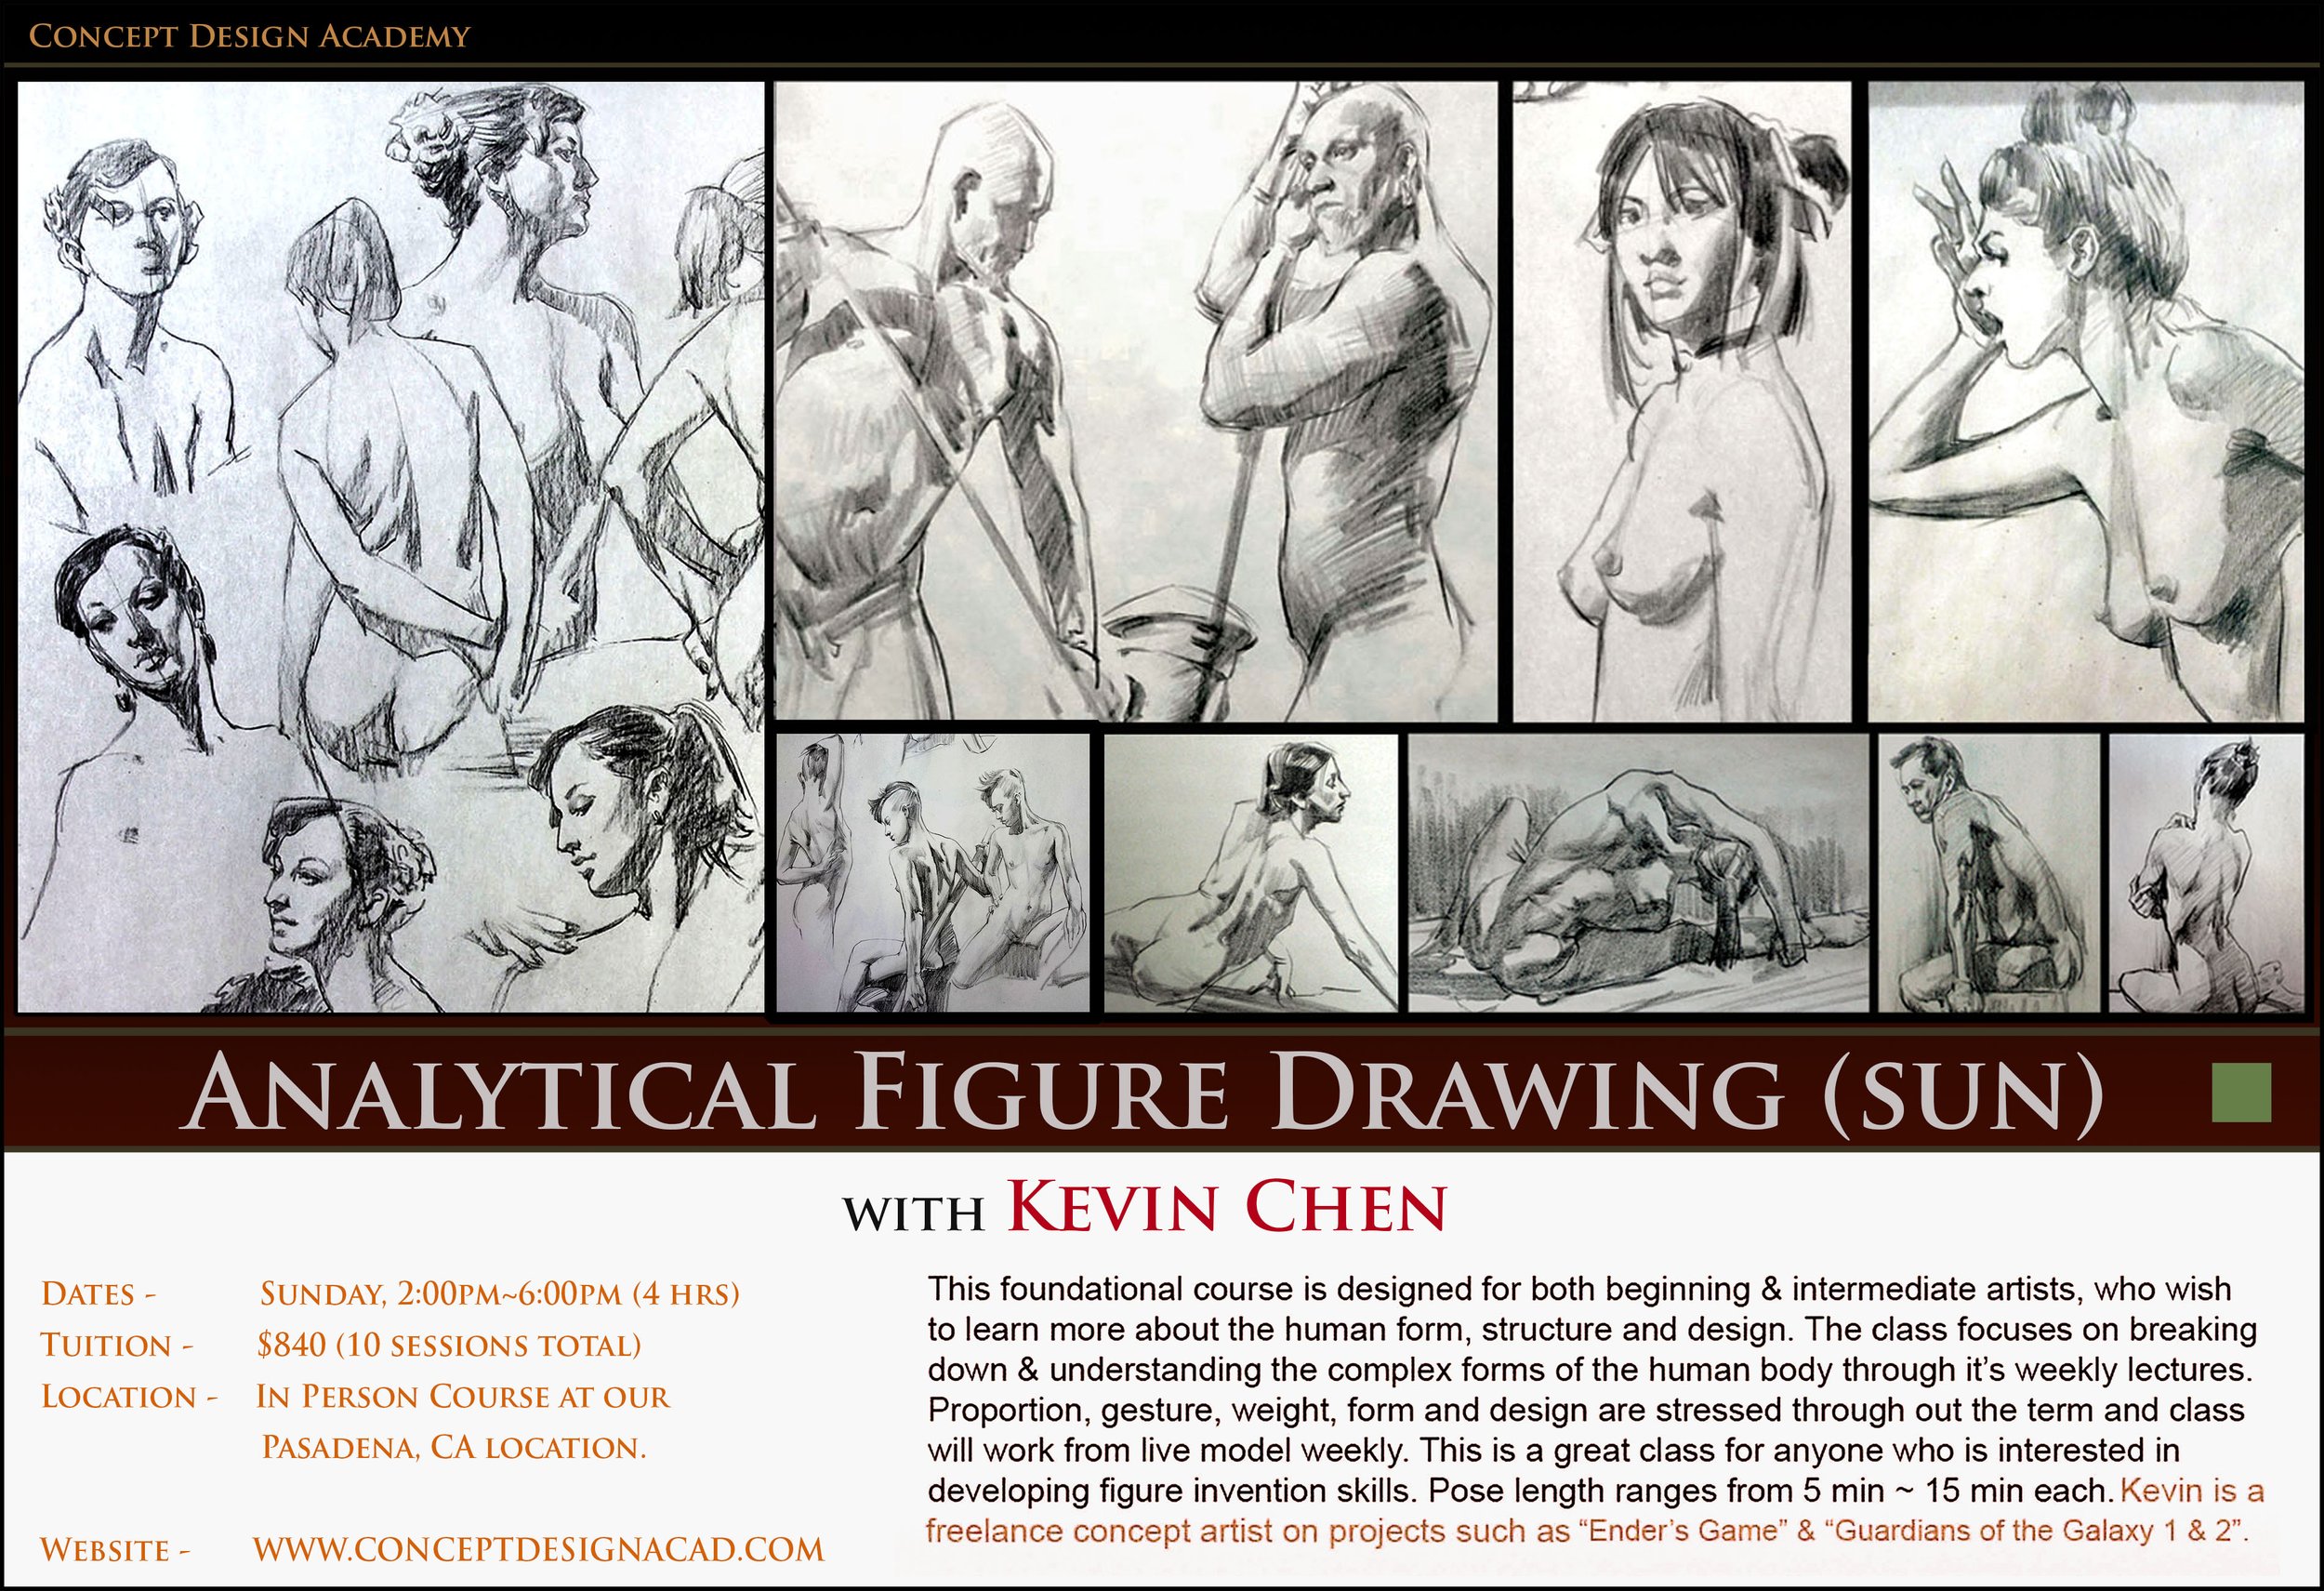 SP24 - Analytical Figure Drawing SUN with Kevin Chen.jpg